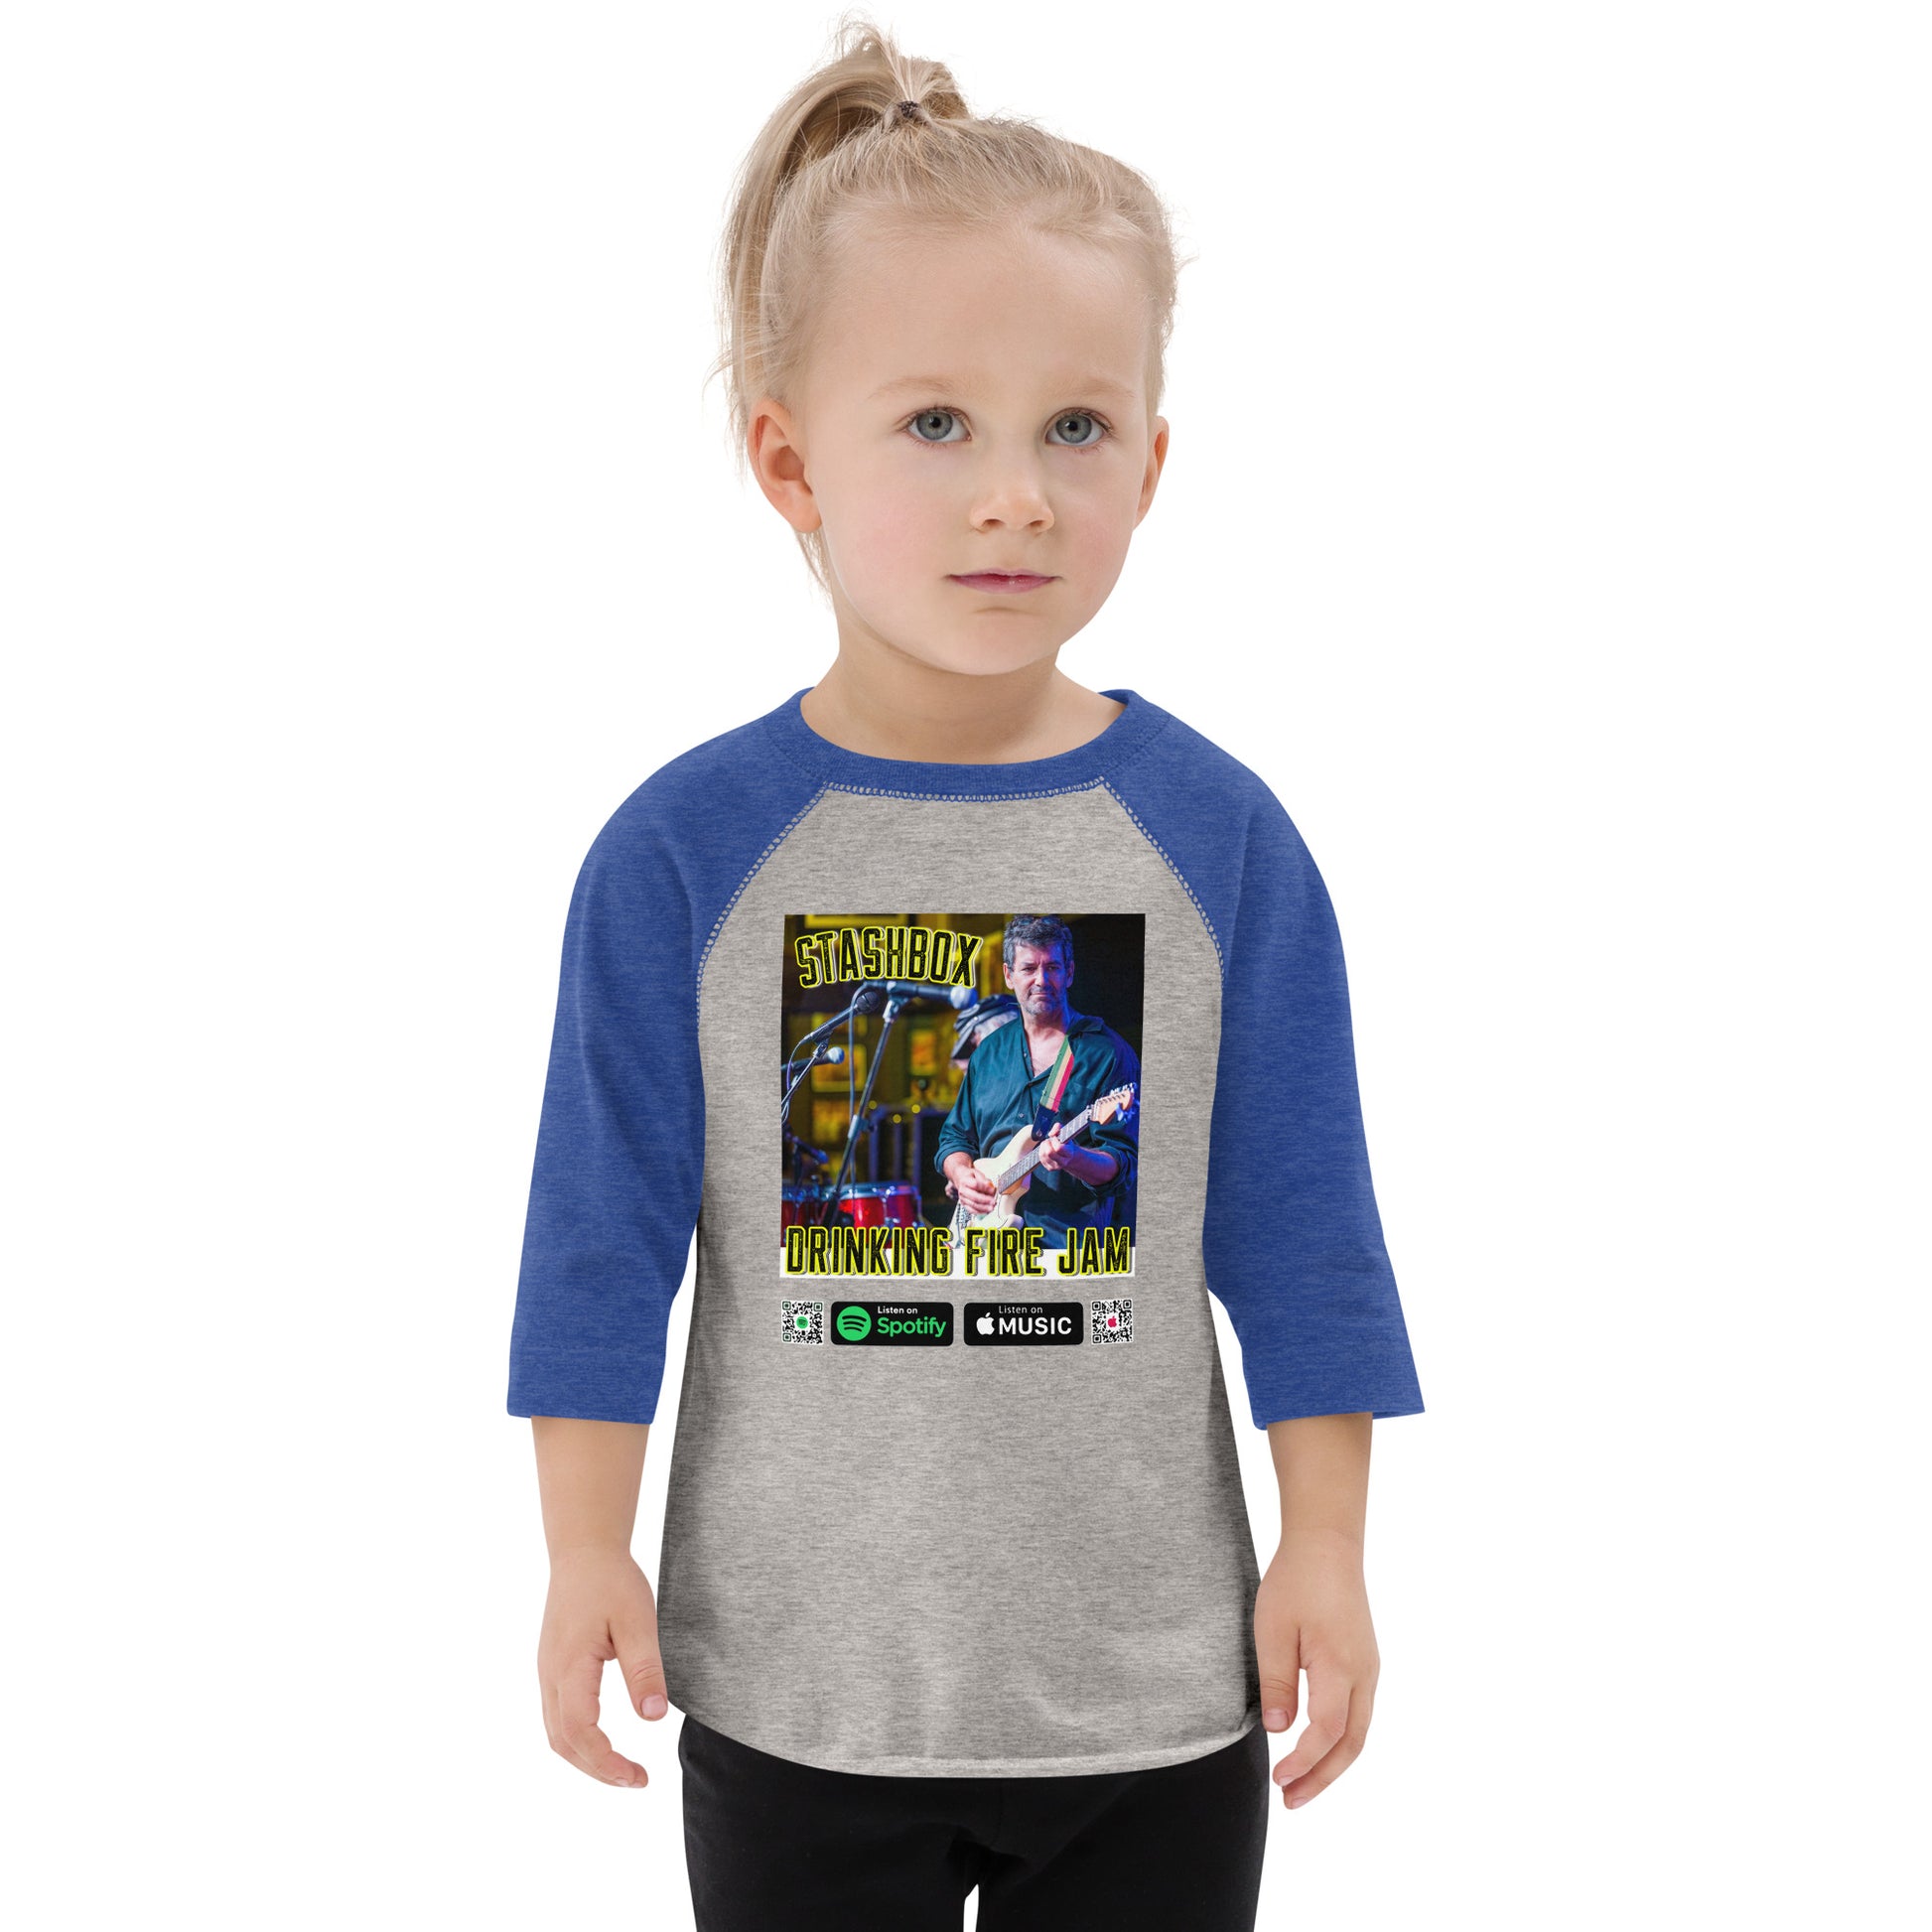 Rock the toddler fashion game with our Drinking Fire Toddler Baseball Shirt. Stashbox Design #004. Your style, your beat, curated by Stashbox.ai.